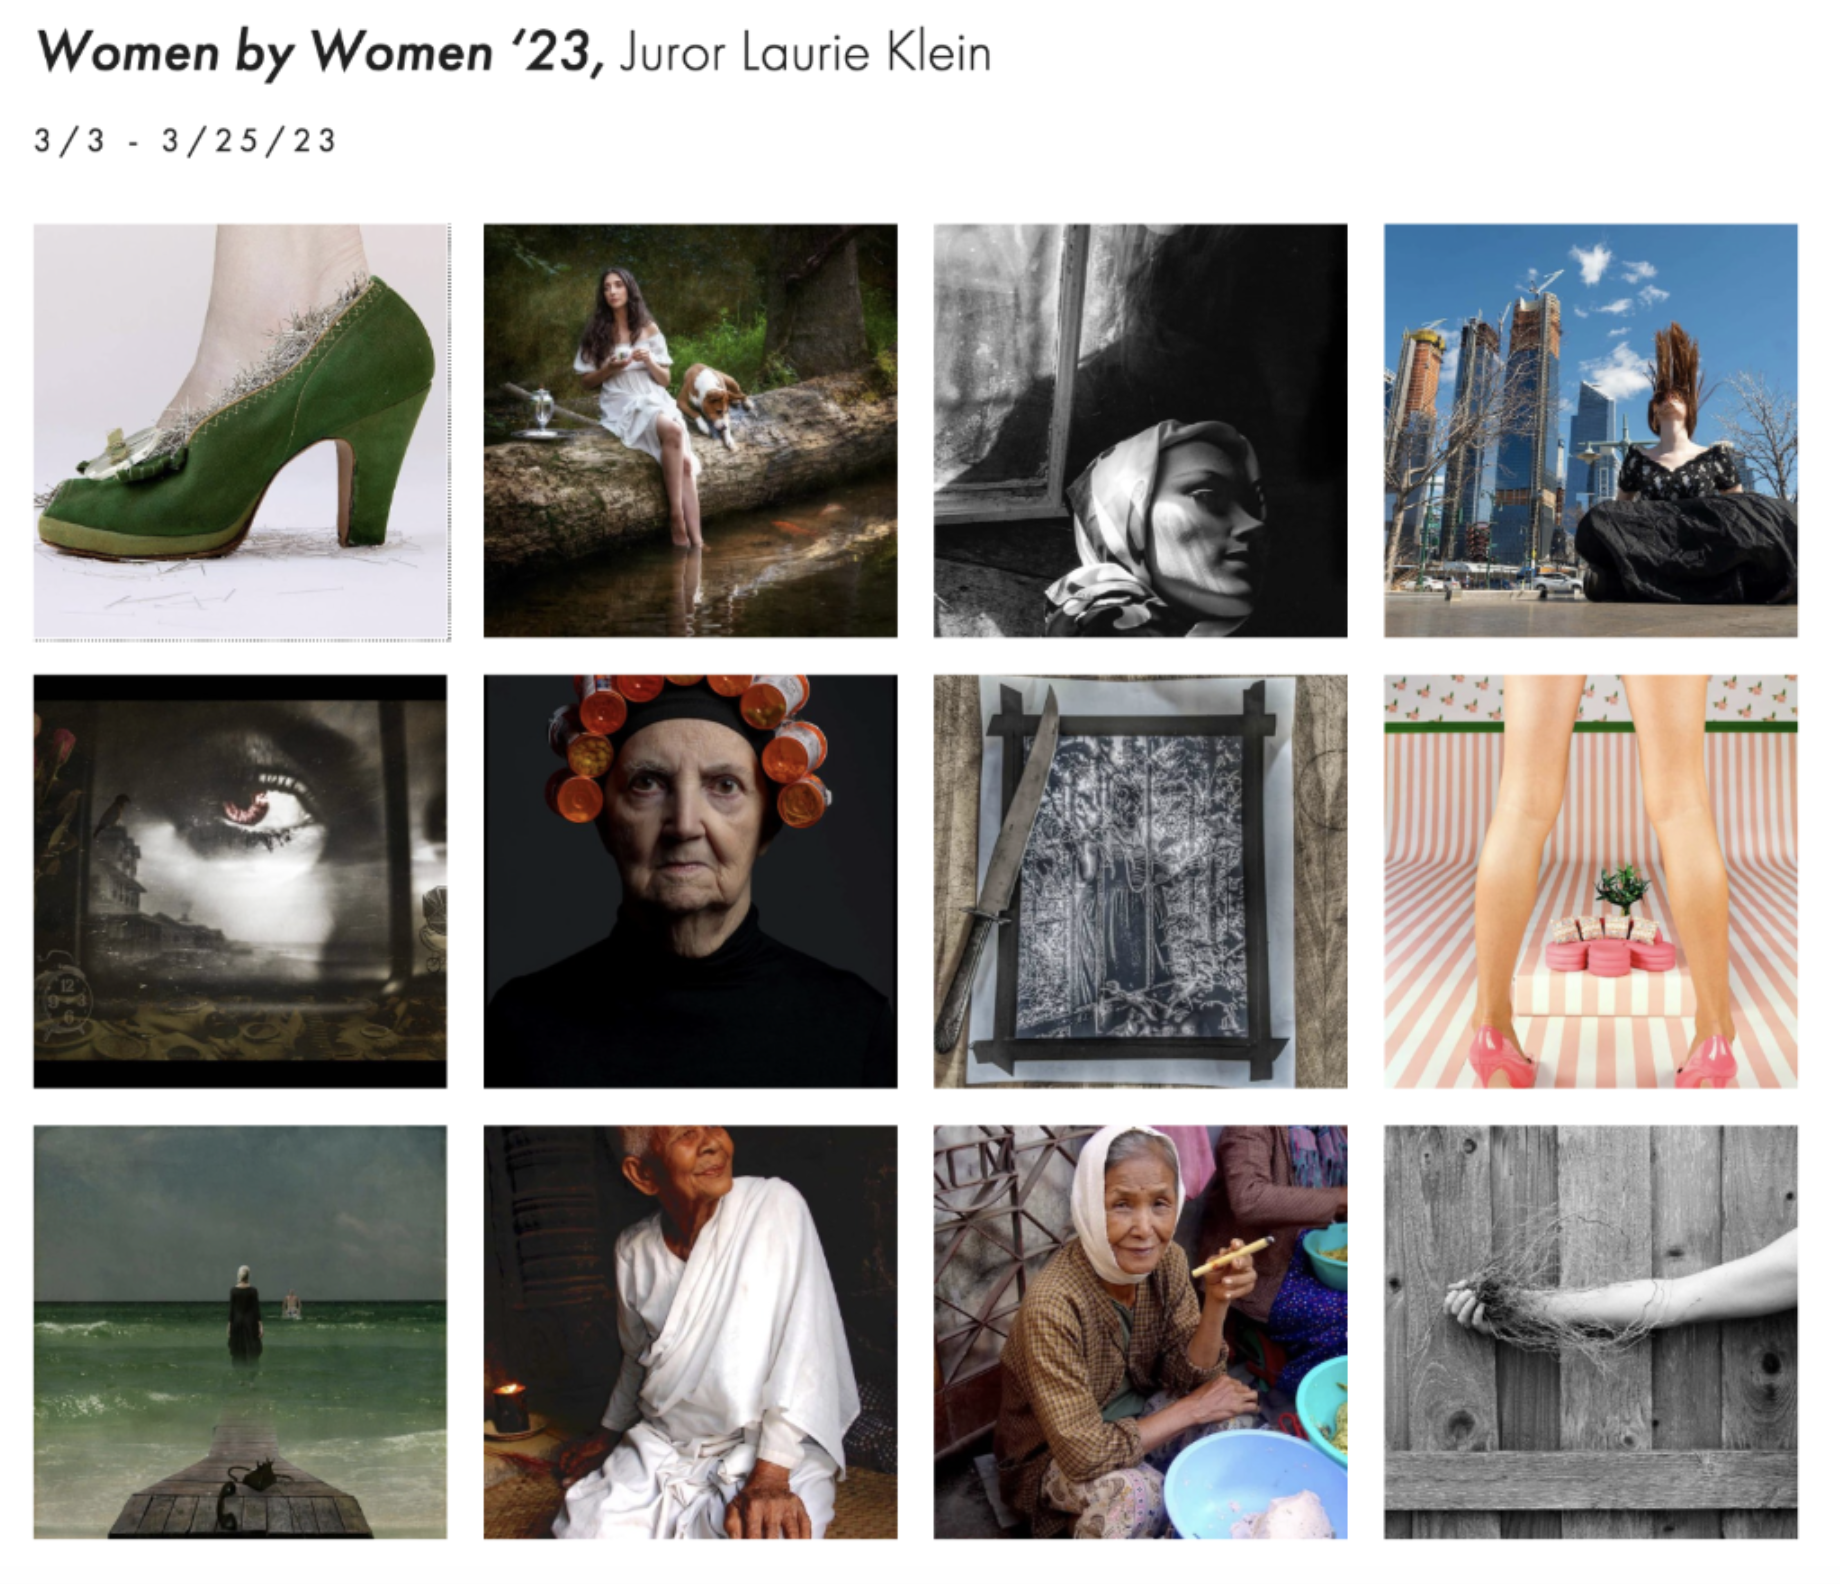 Women by Women at the SE Center for Photography March 3 - March 25, 2023